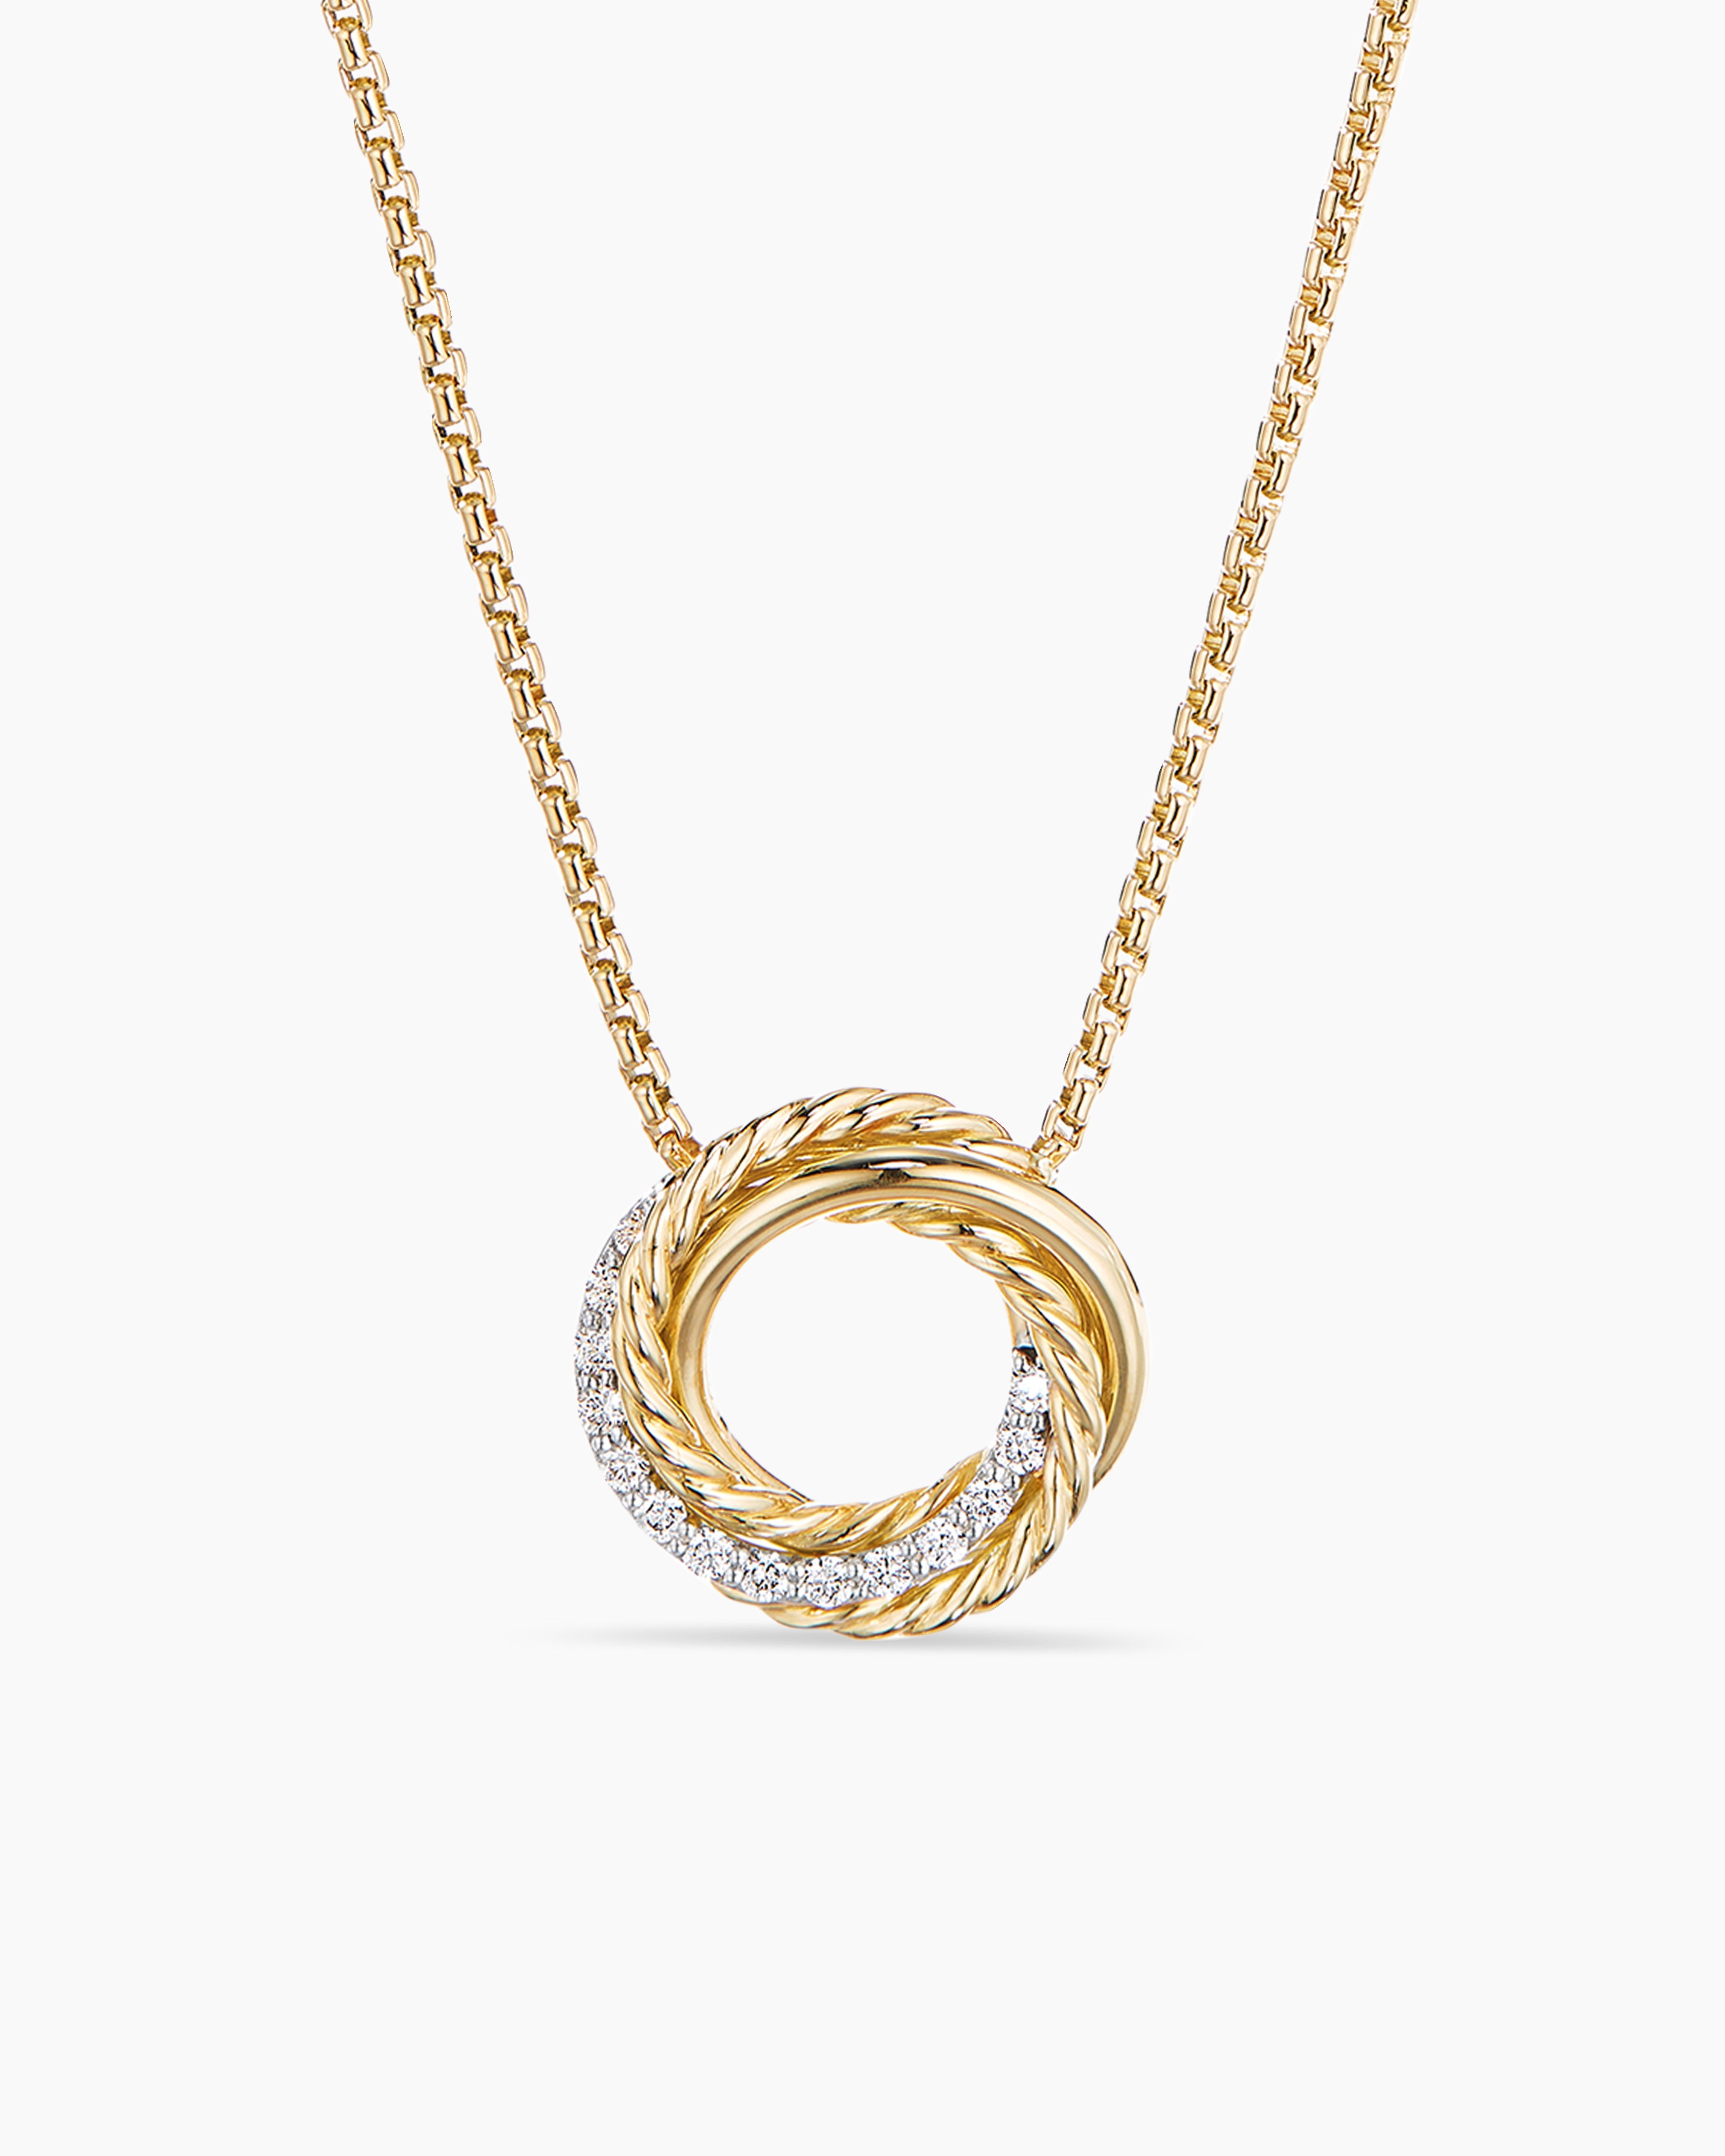 Crossover Pendant Necklace in 18K Yellow Gold with Diamonds, 14.5